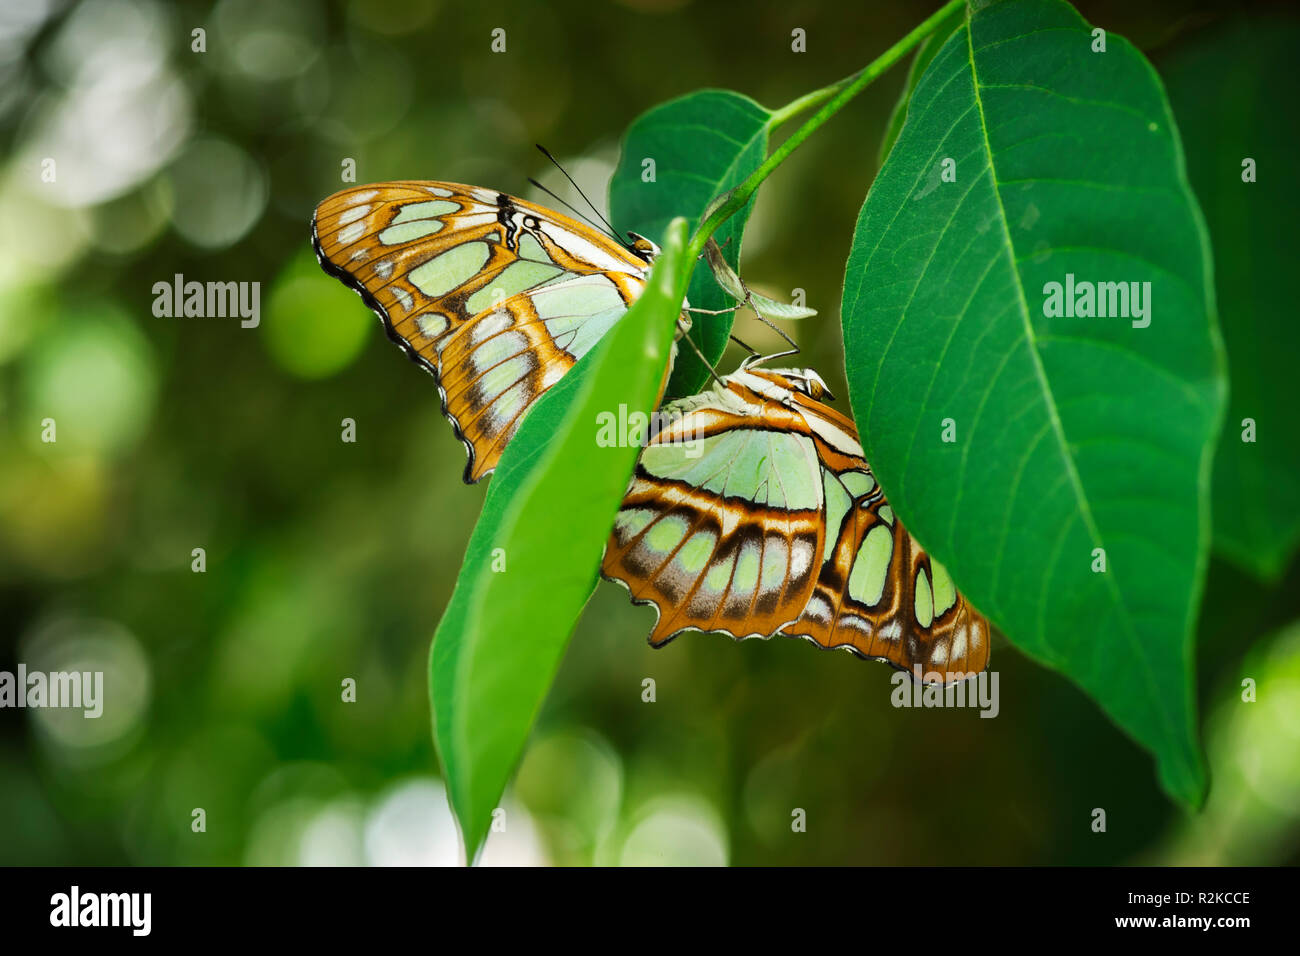 Full-body side view of two touching malachite butterflies (lat .: Siproeta stelenes) sitting opposite each other with folded wings (underside) against Stock Photo